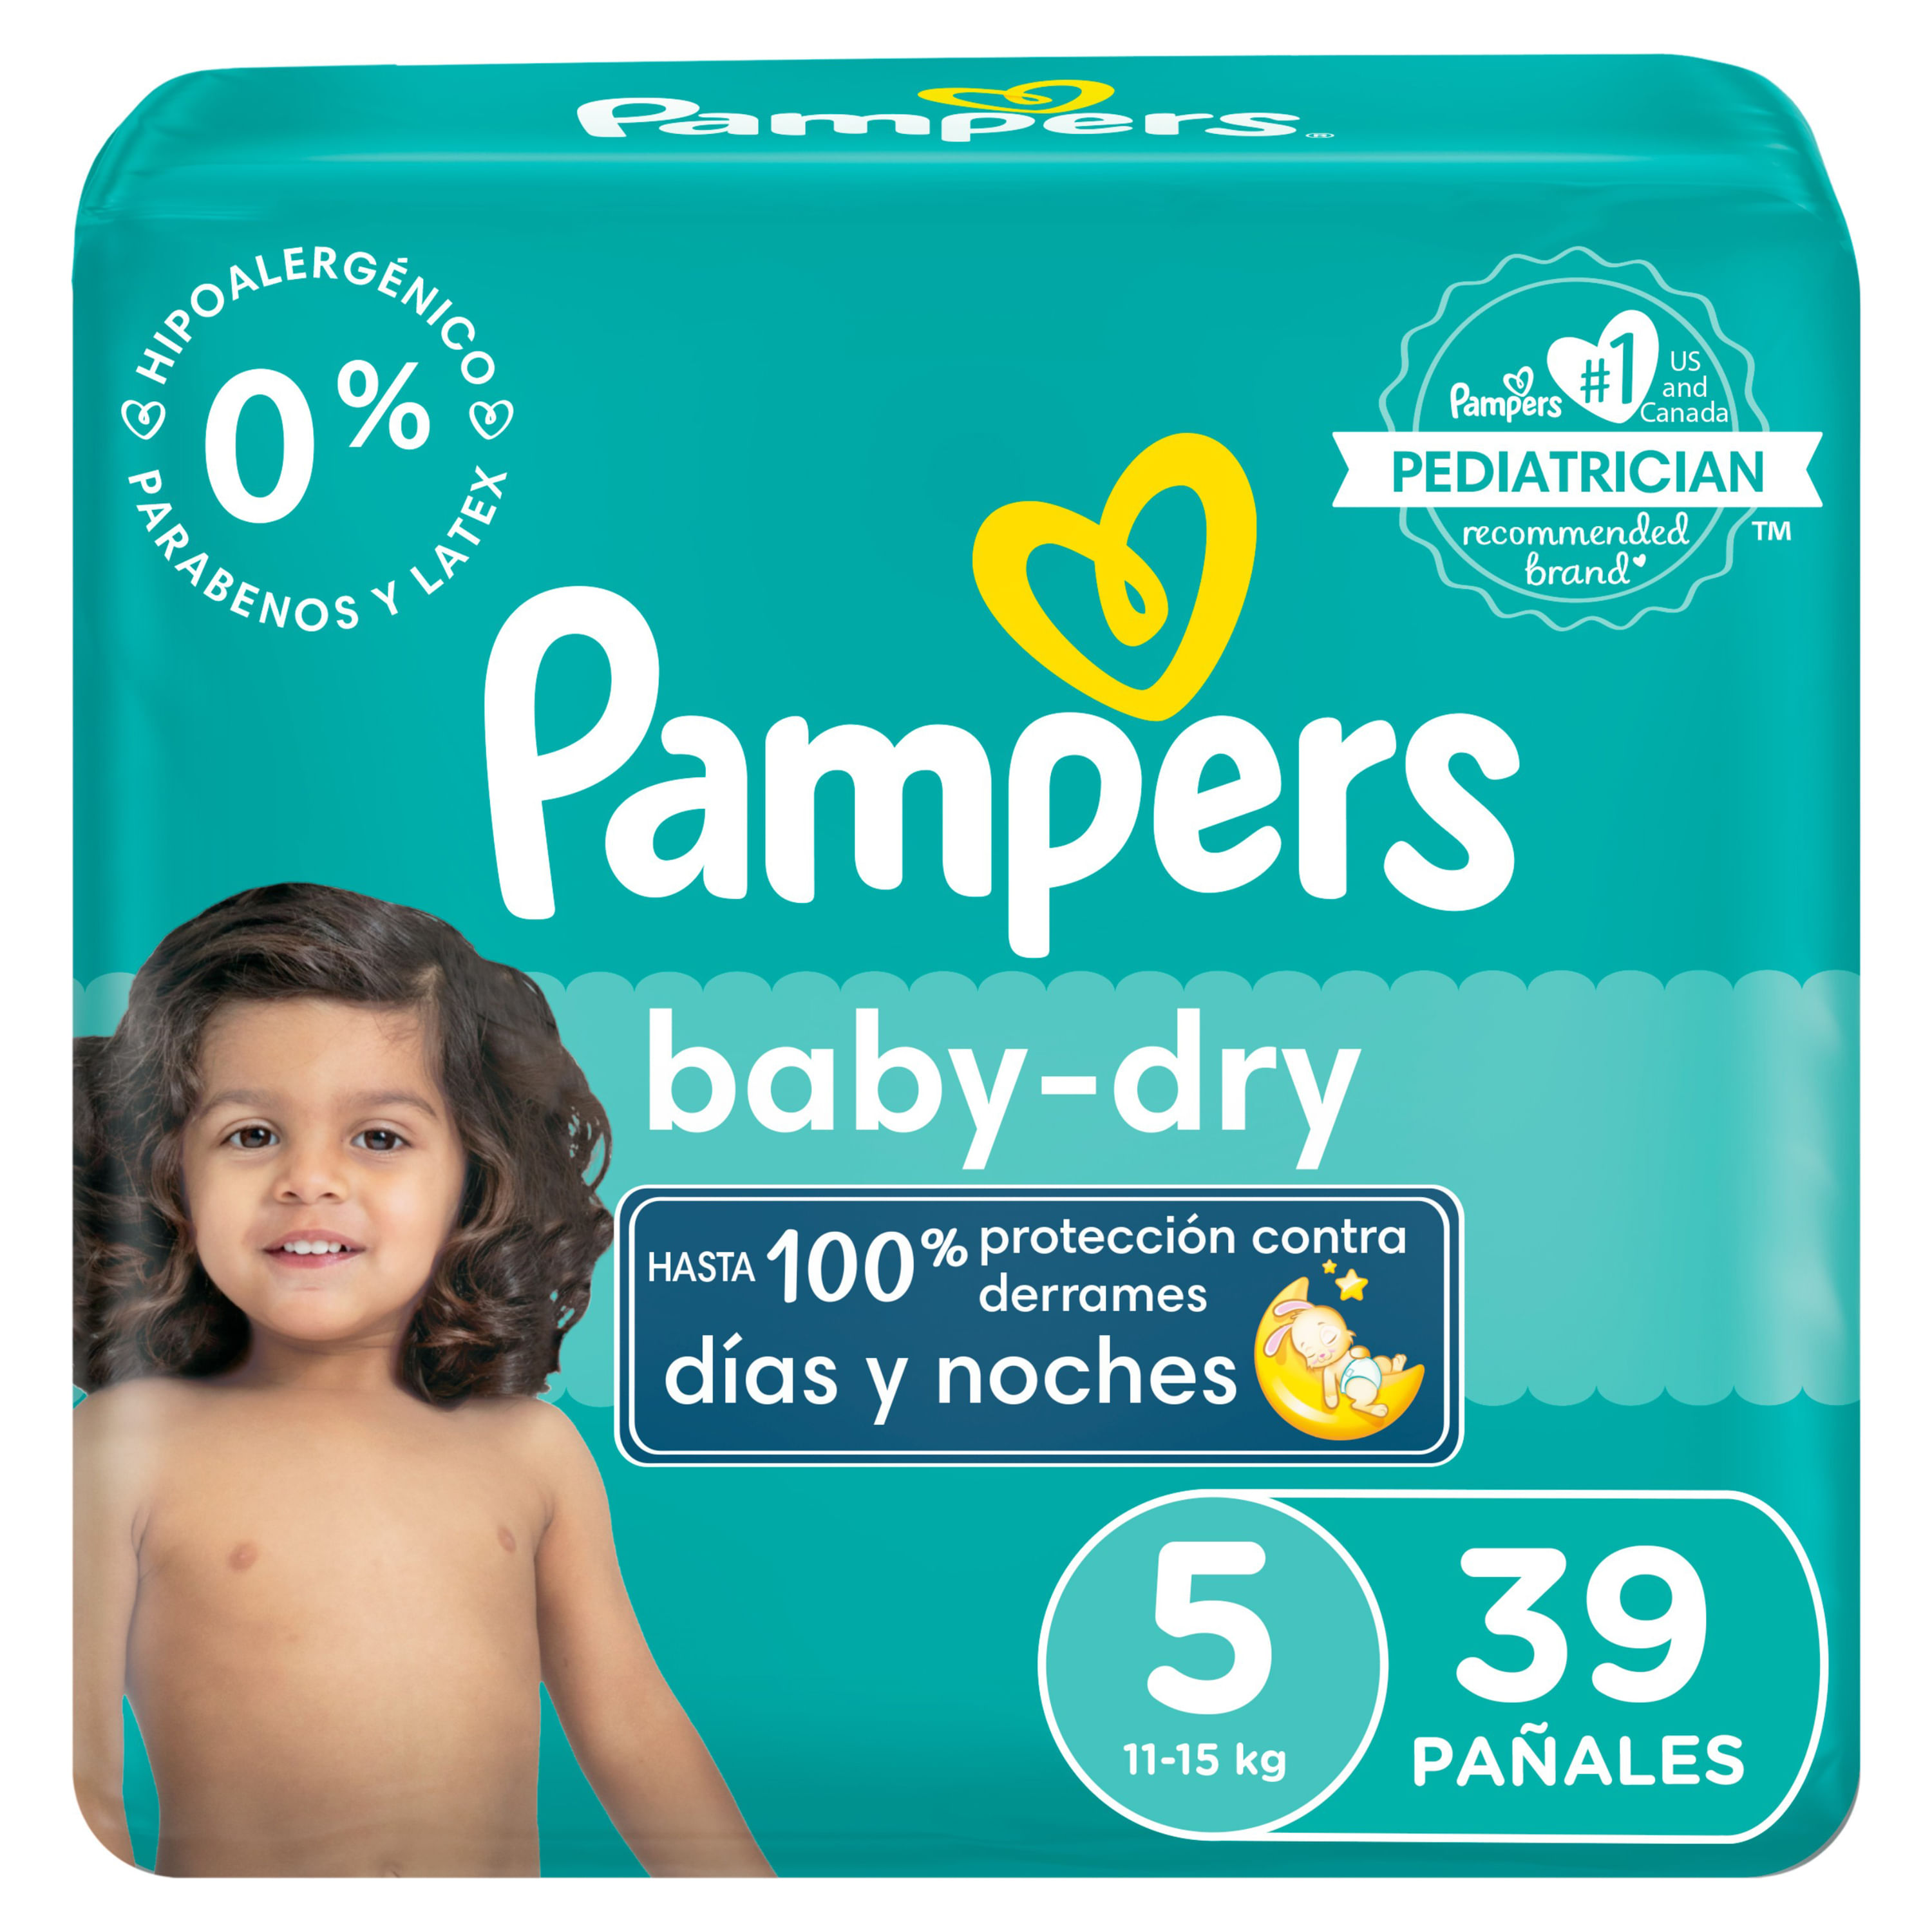 Pa-ales-Pampers-Baby-Dry-Talla-5-39-Unidades-1-28971